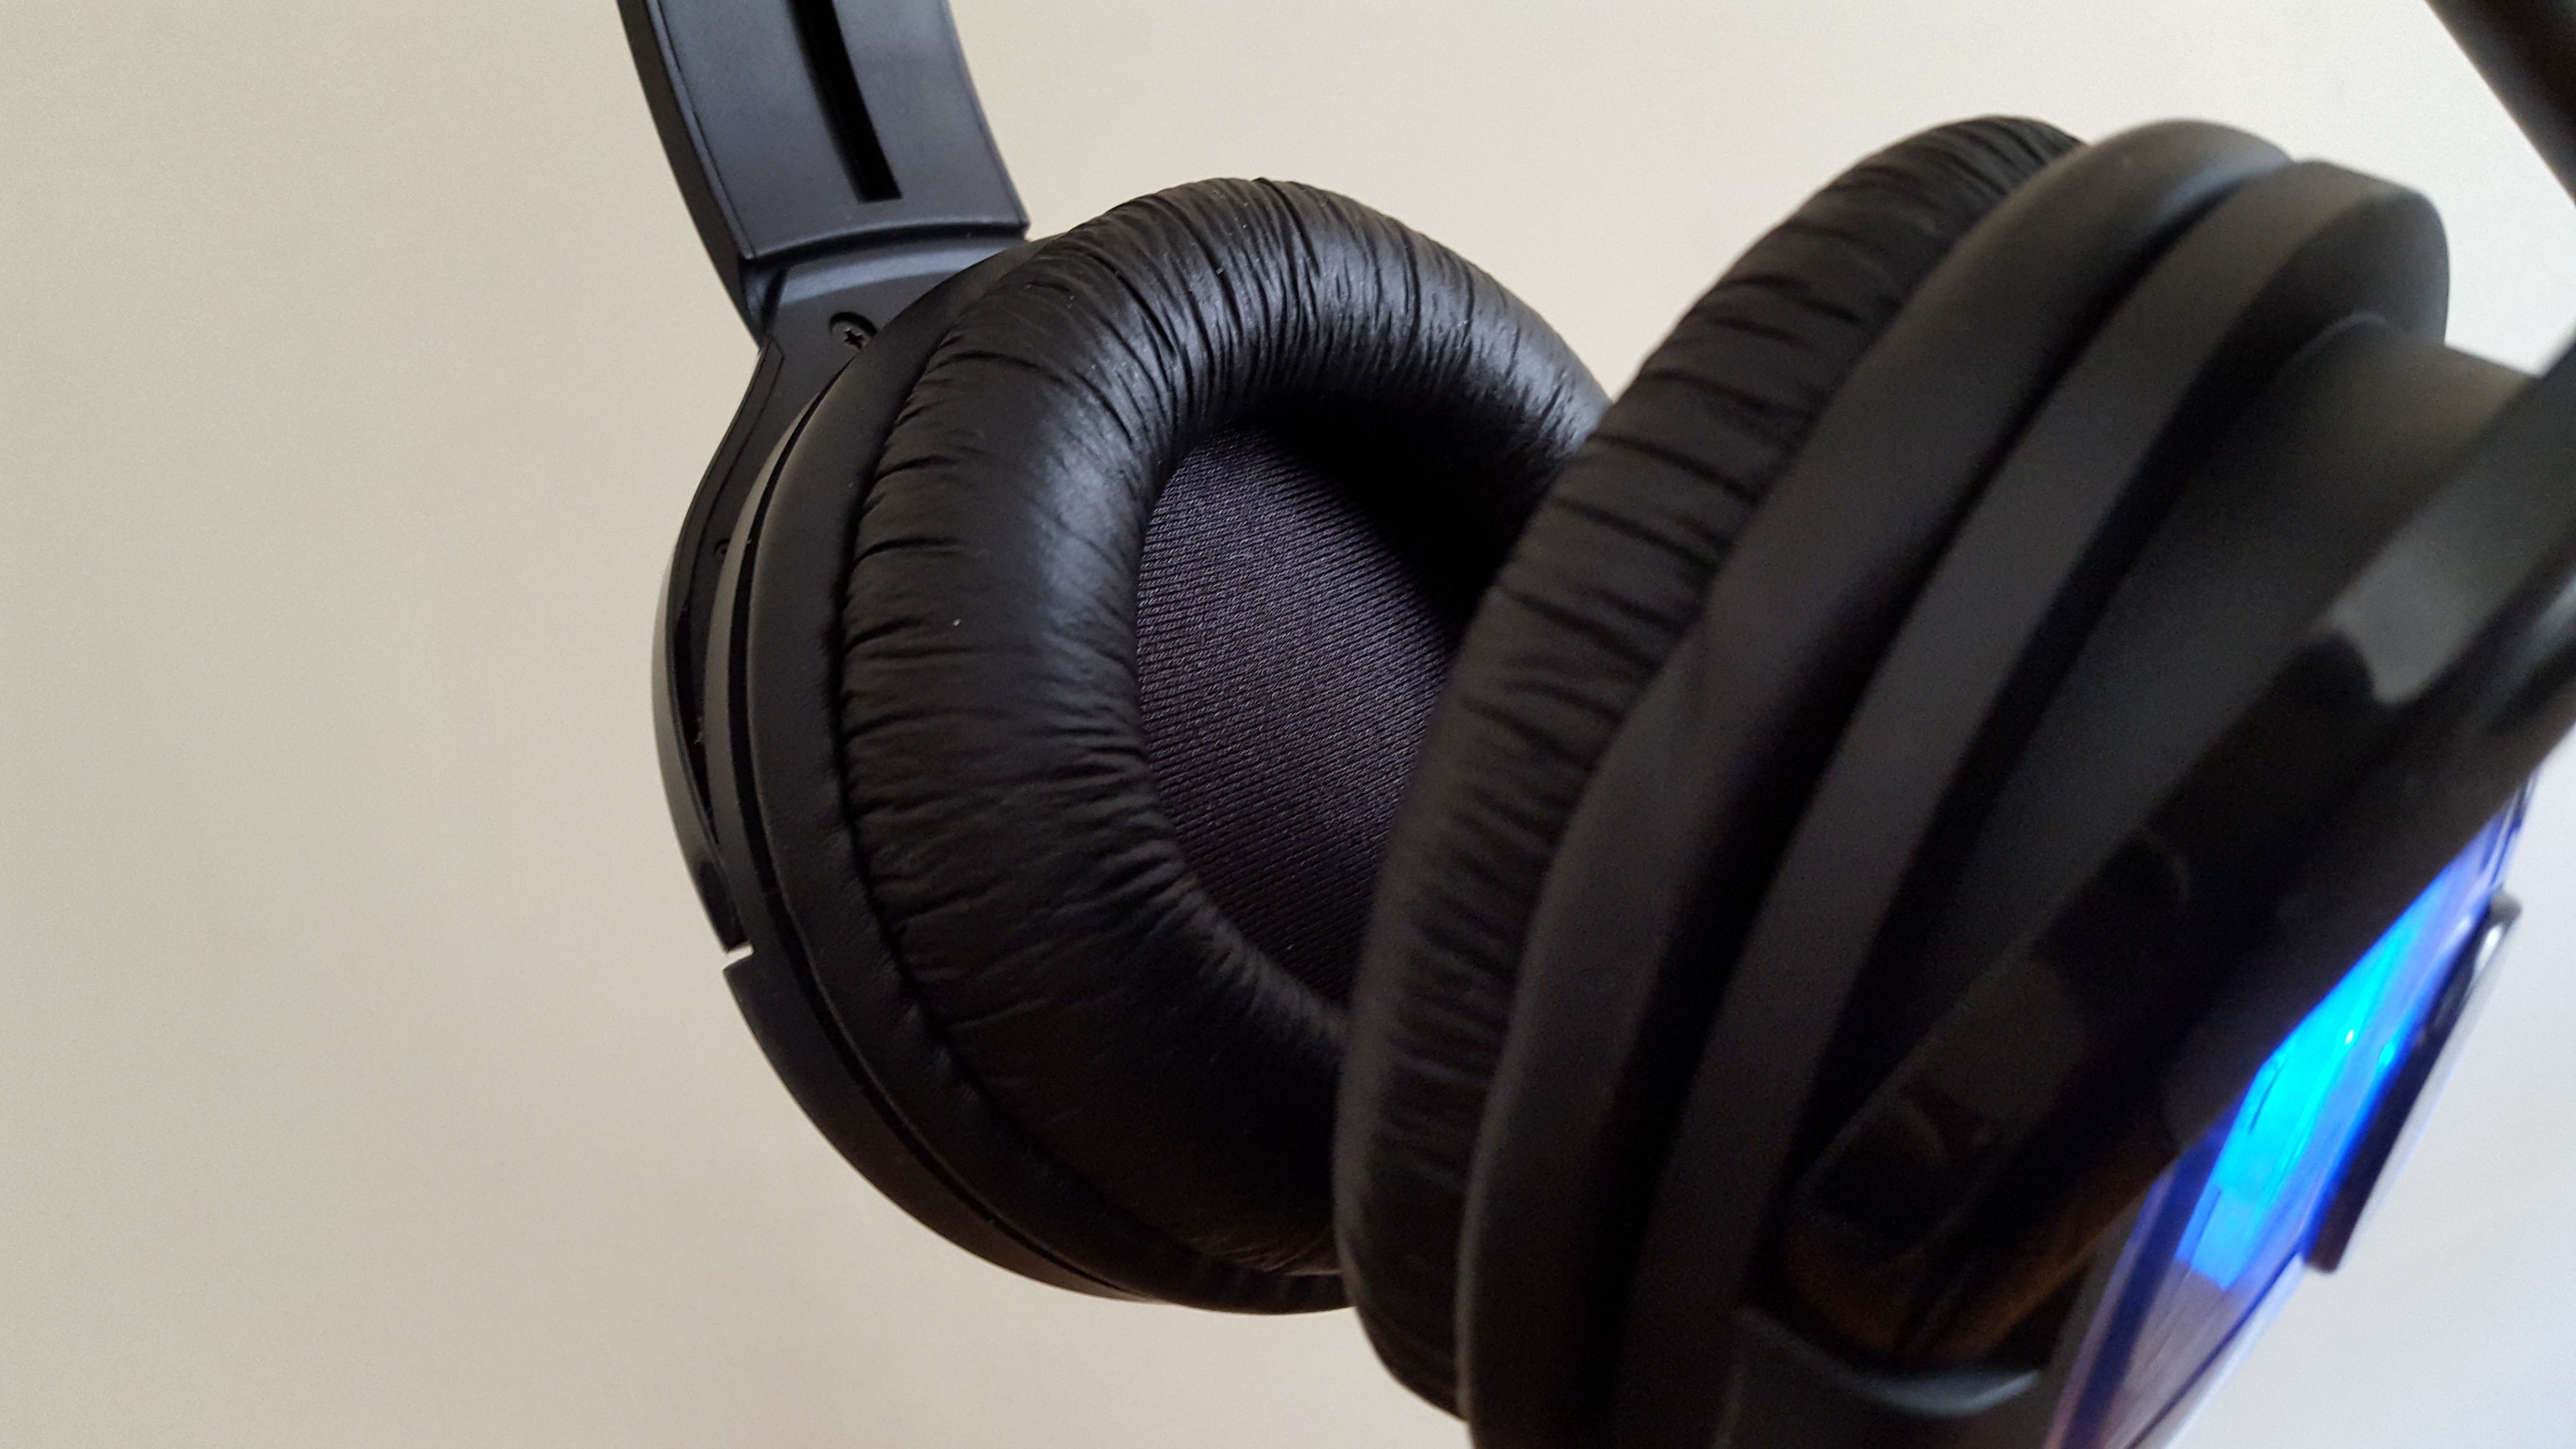 PDP Afterglow AG 9 review: This sub-$100 wireless headset has a lot